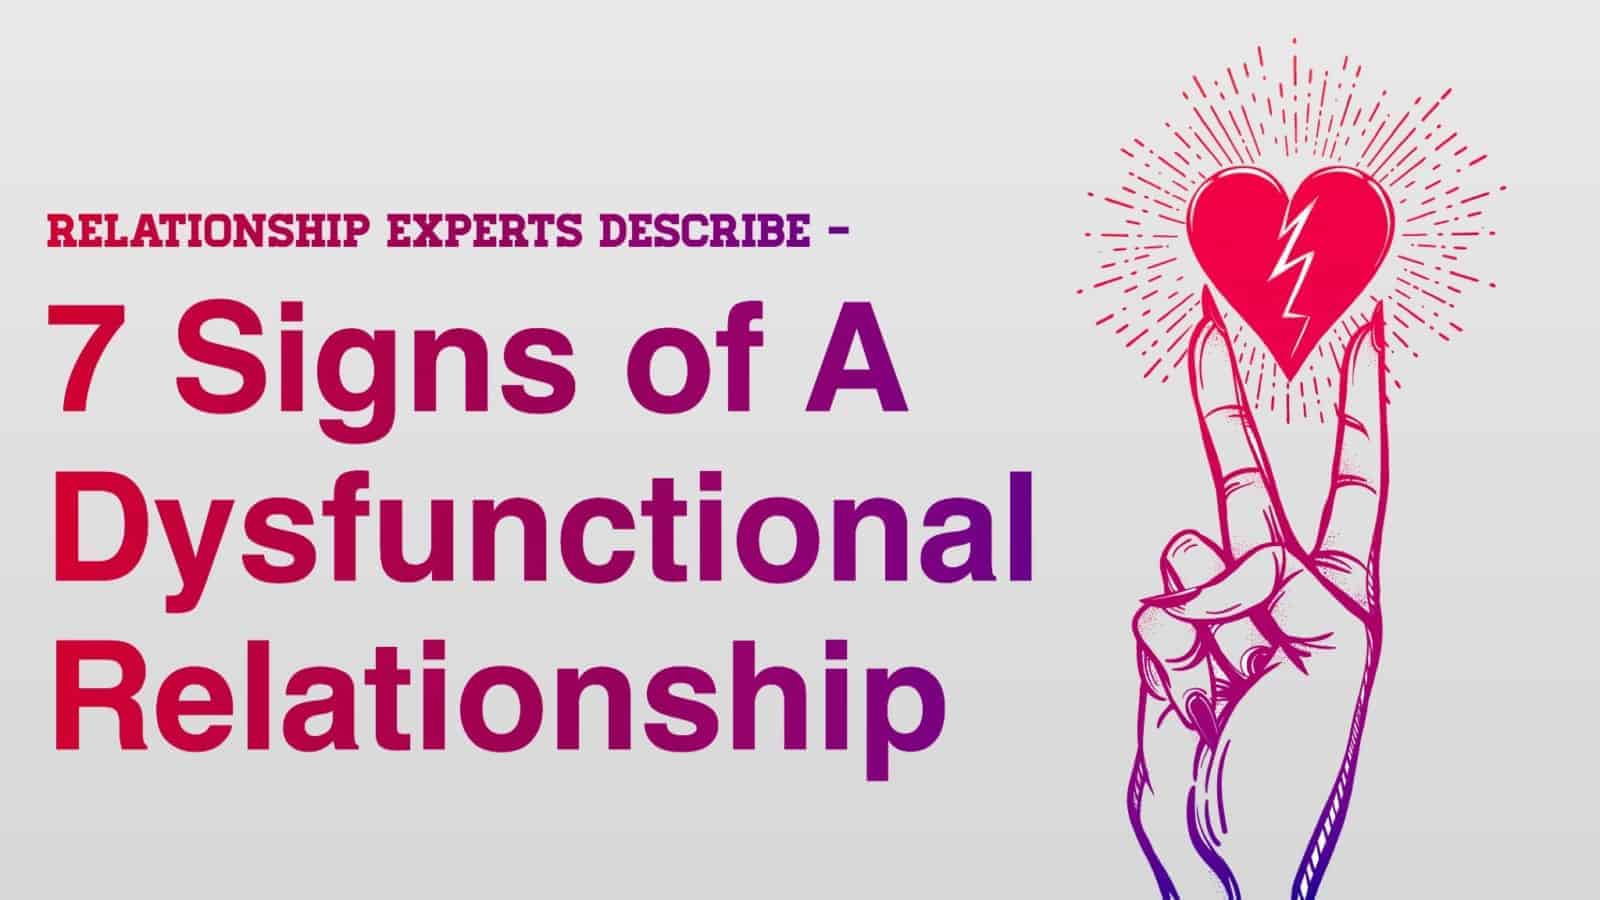 Relationship Experts Describe The 7 Signs of A Dysfunctional Relationship